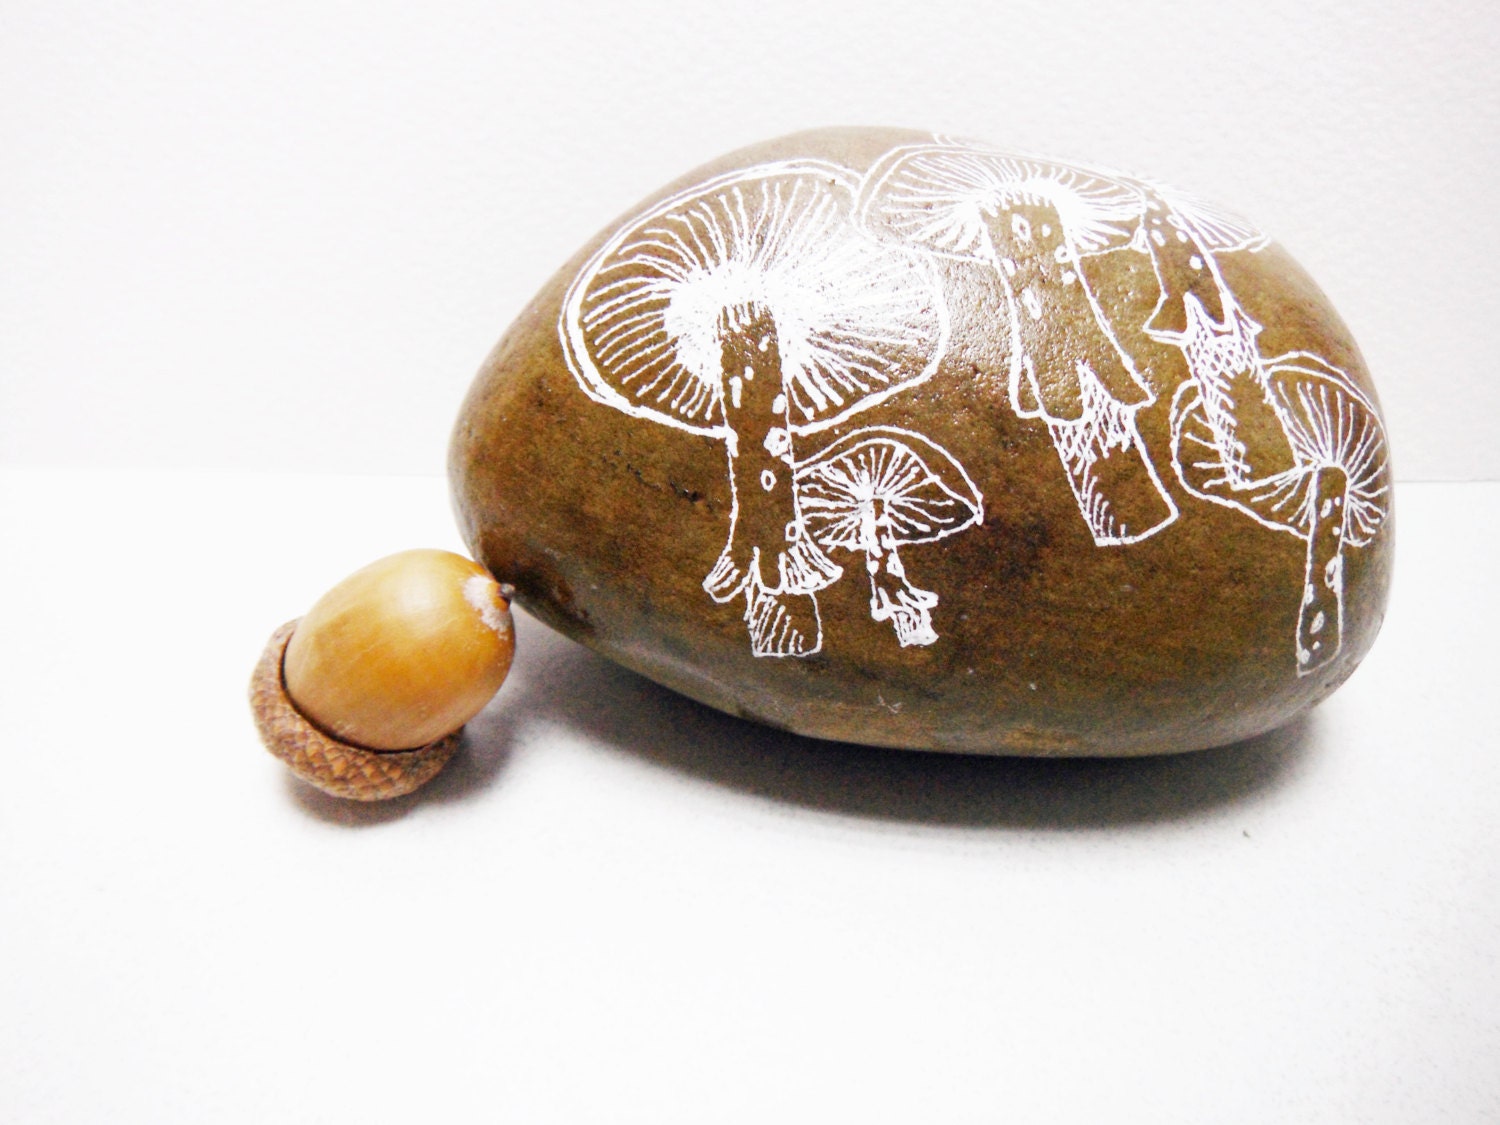 river rock painted with white mushrooms as a paperweight - FallingLadies